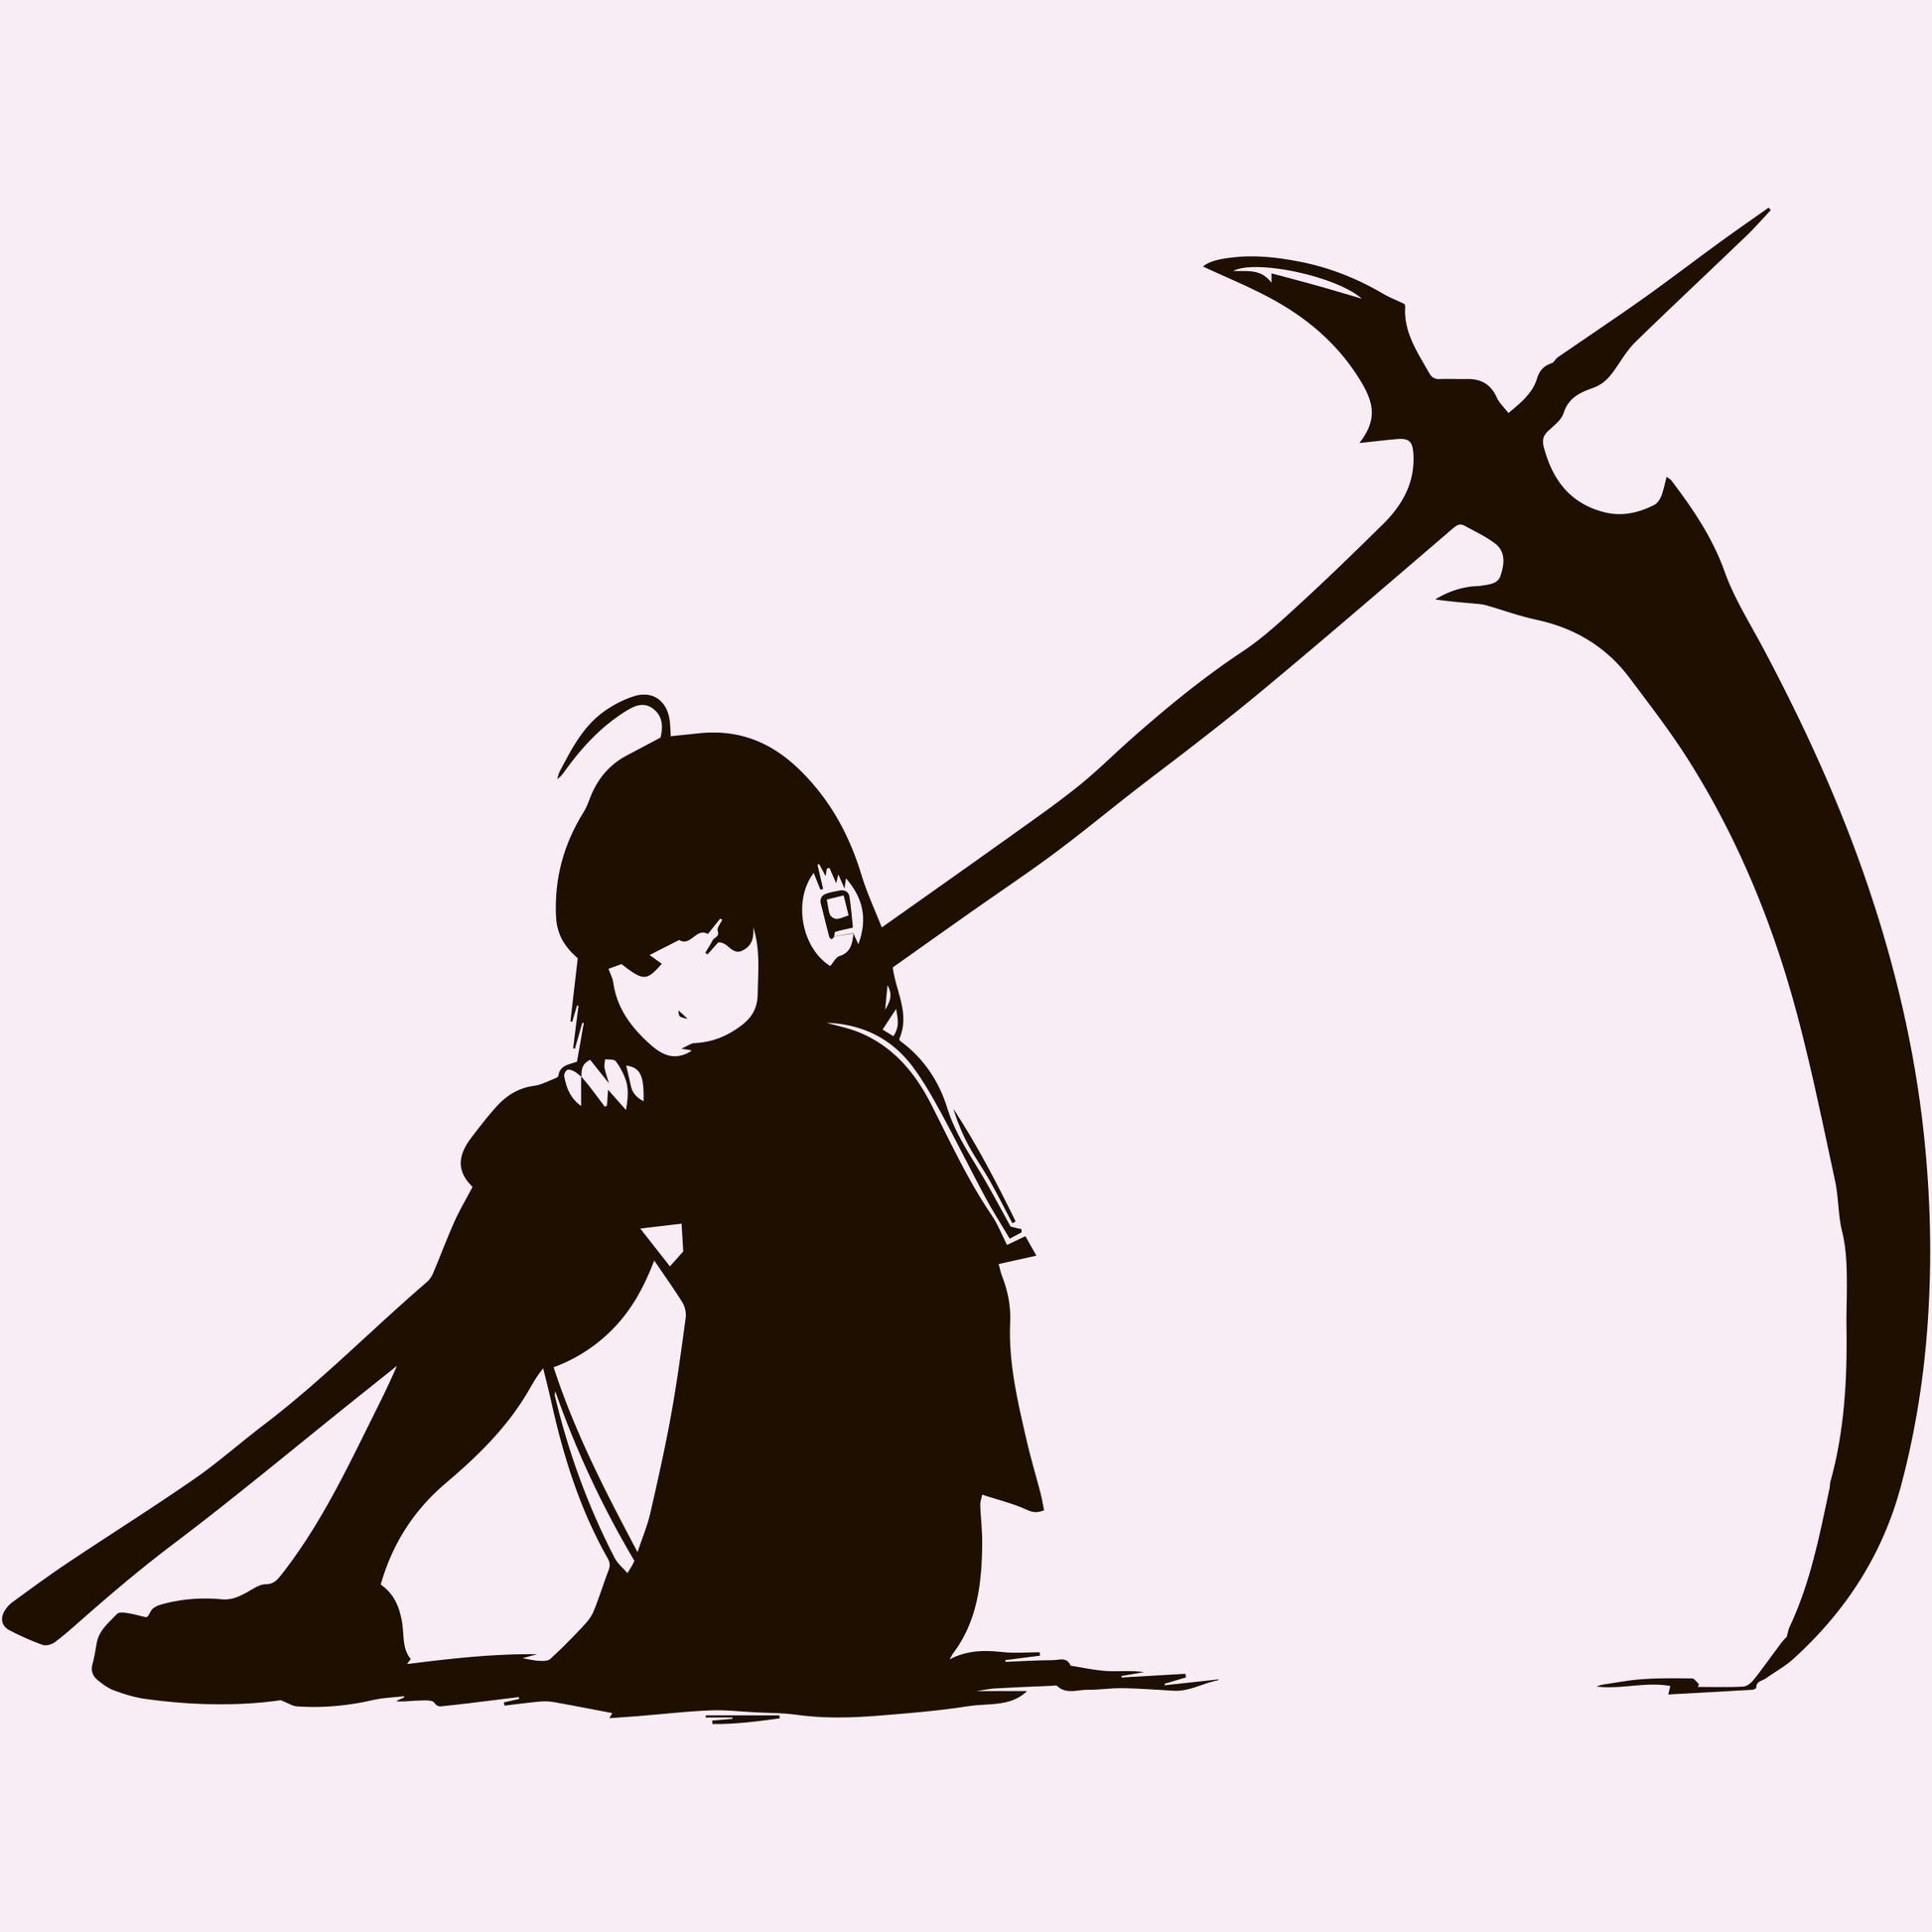 Anime Wall Decals Girl With Scythe Of Death - EC1095 – SDA Image Design Shop